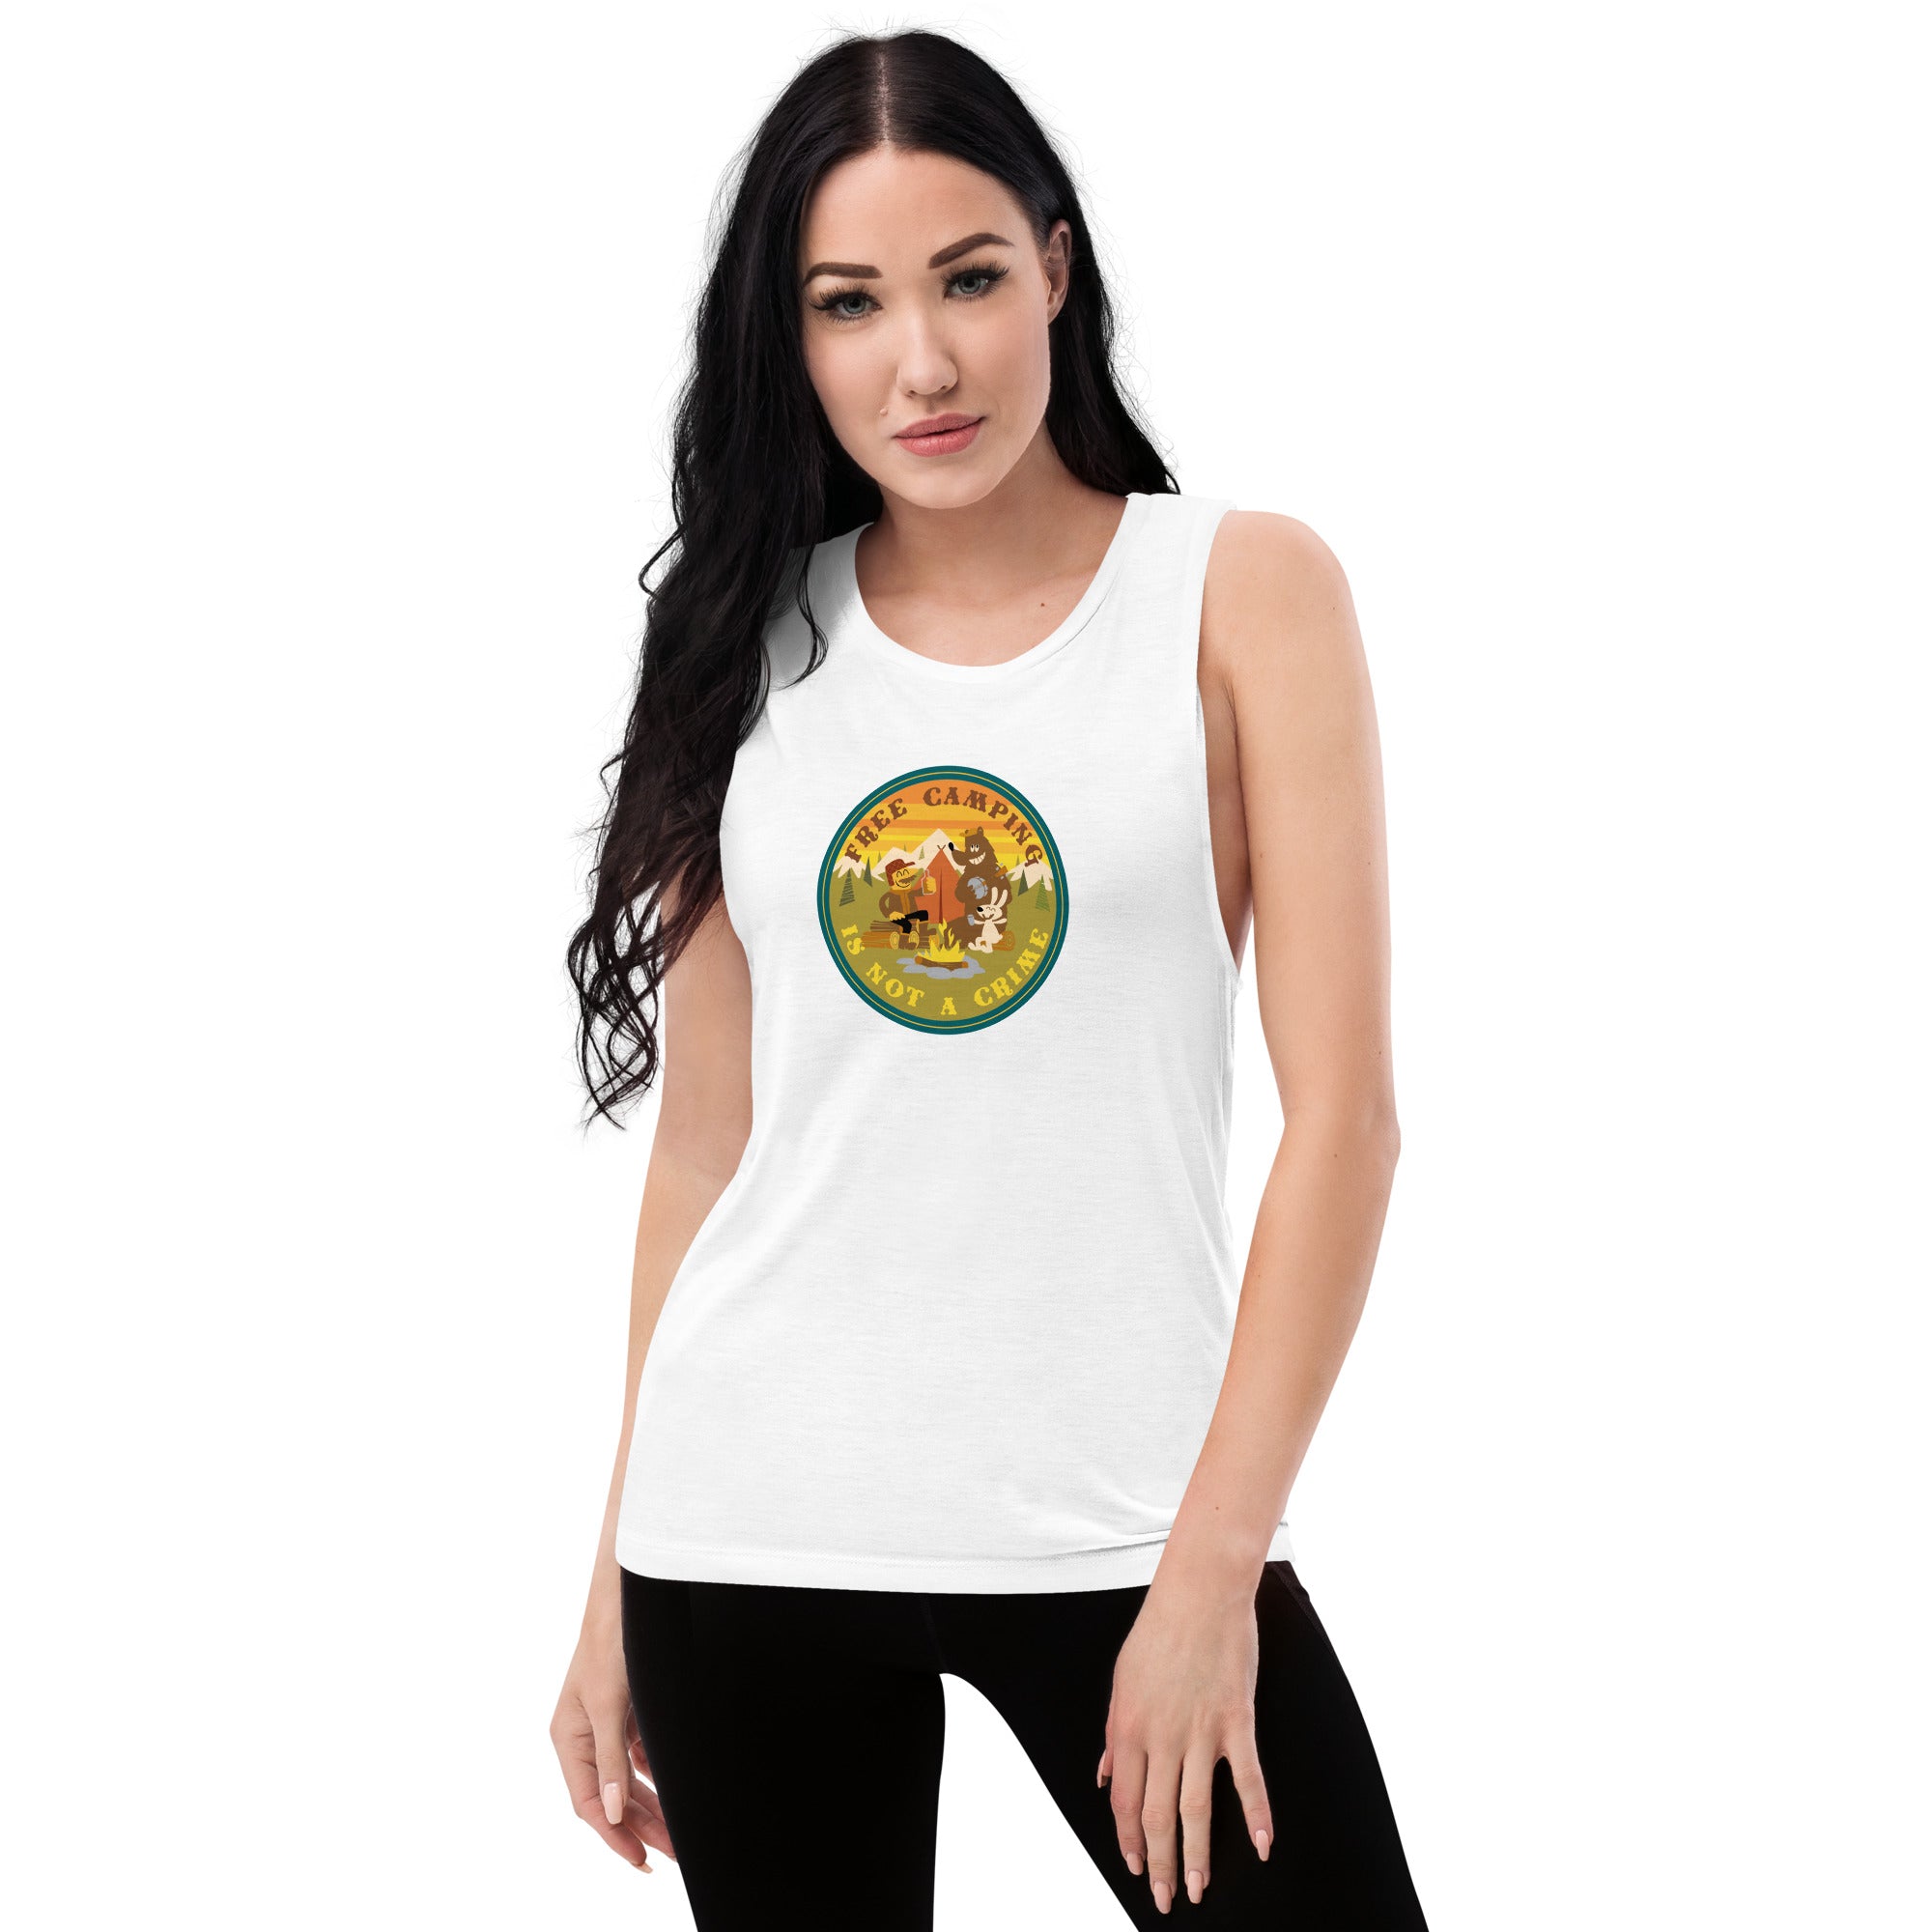 Ladies’ Muscle Tank Free camping is not a crime